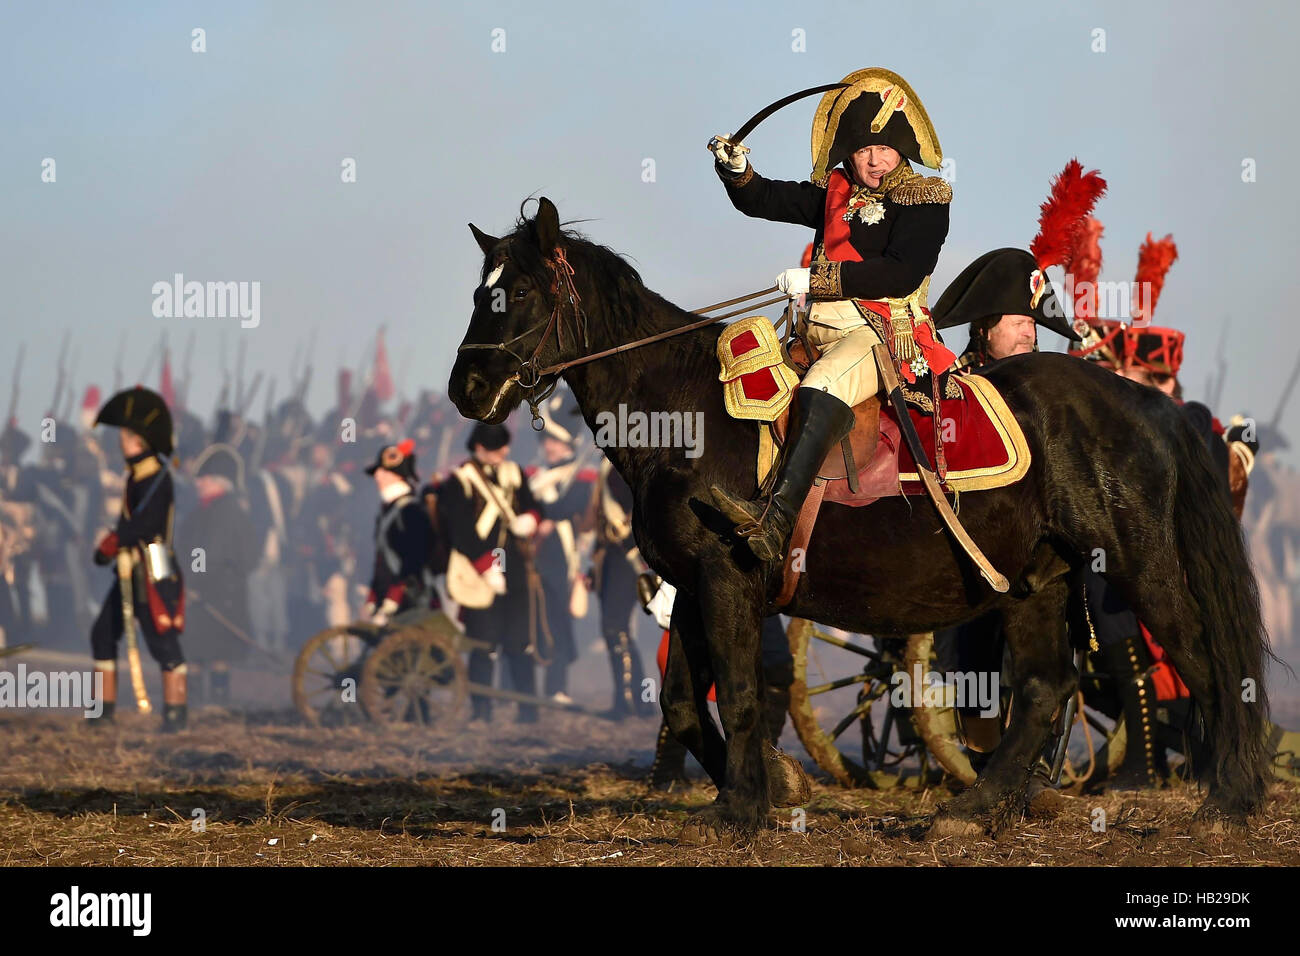 Tvarozna, Czech Republic. 03rd Dec, 2016. The re-enactment of the Battle at Slavkov (Austerlitz), where the Napoleonic army scored a famous victory in 1805, was staged by history fans in period uniforms in Tvarozna, Czech republic, December 3, 2016. © Vaclav Salek/CTK Photo/Alamy Live News Stock Photo